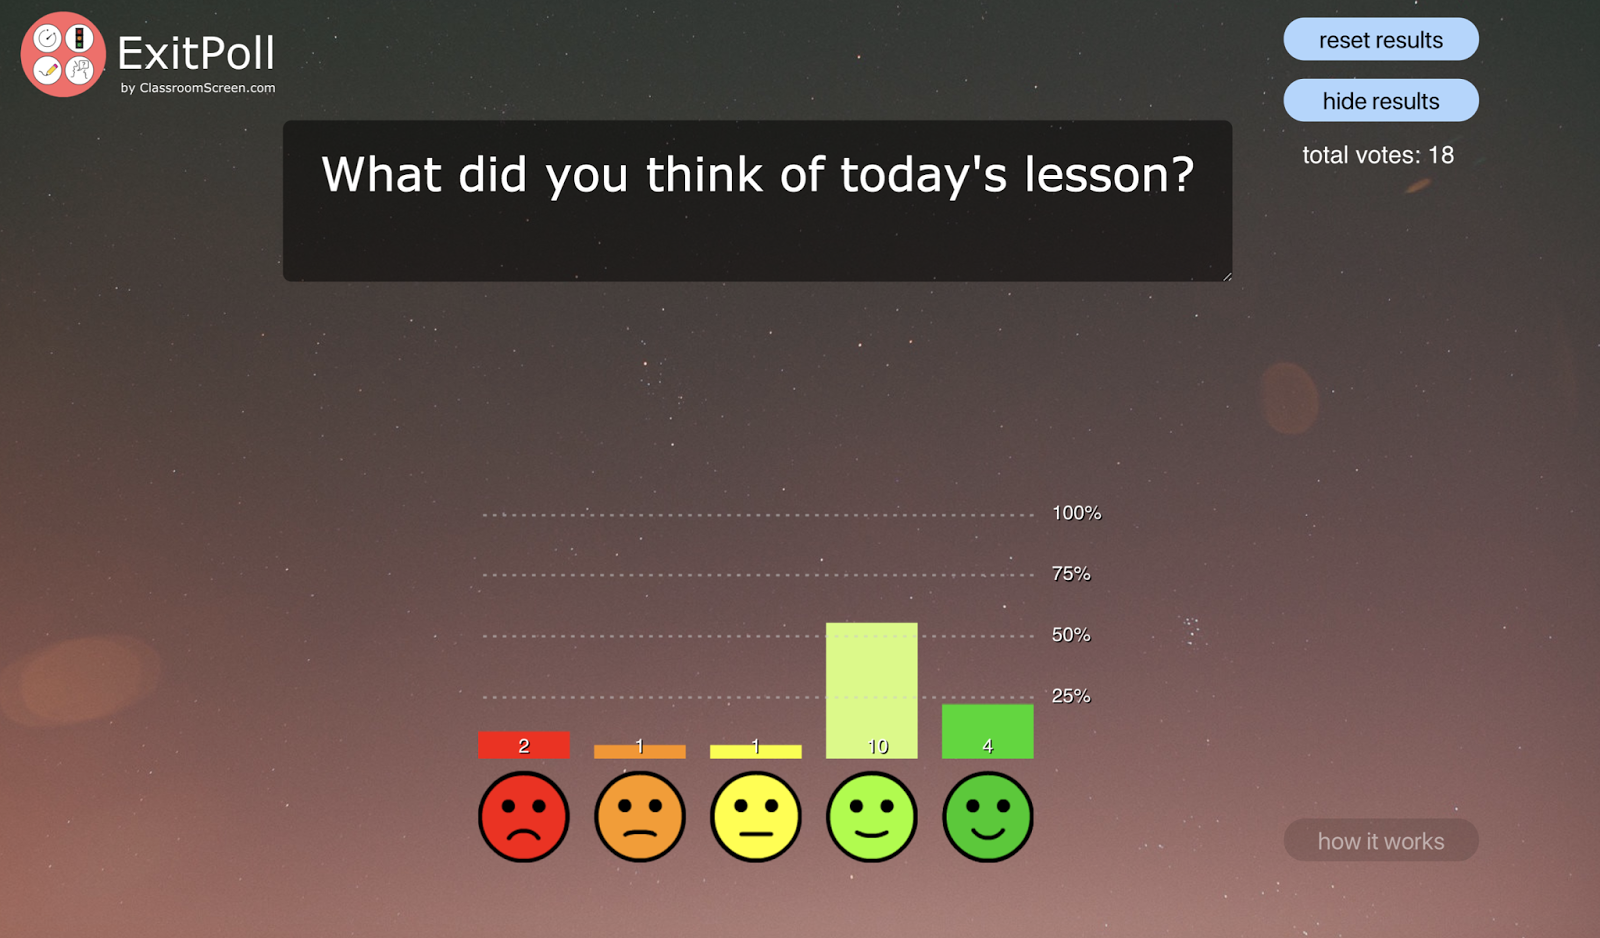 ClassroomScreen Review for Teachers